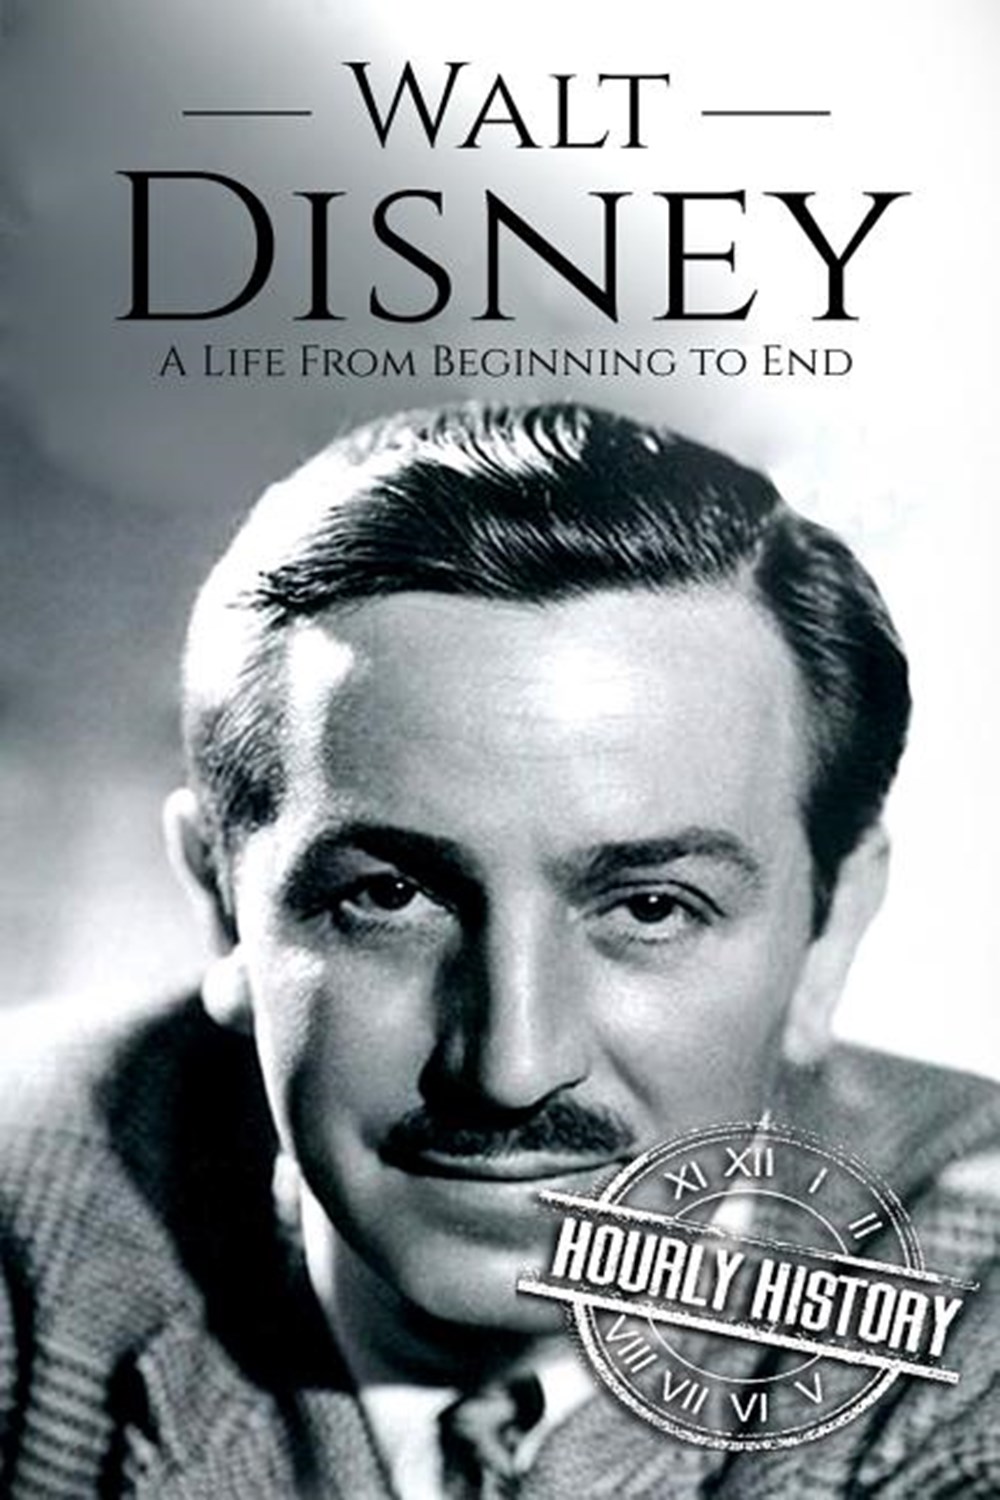 Walt Disney A Life From Beginning to End